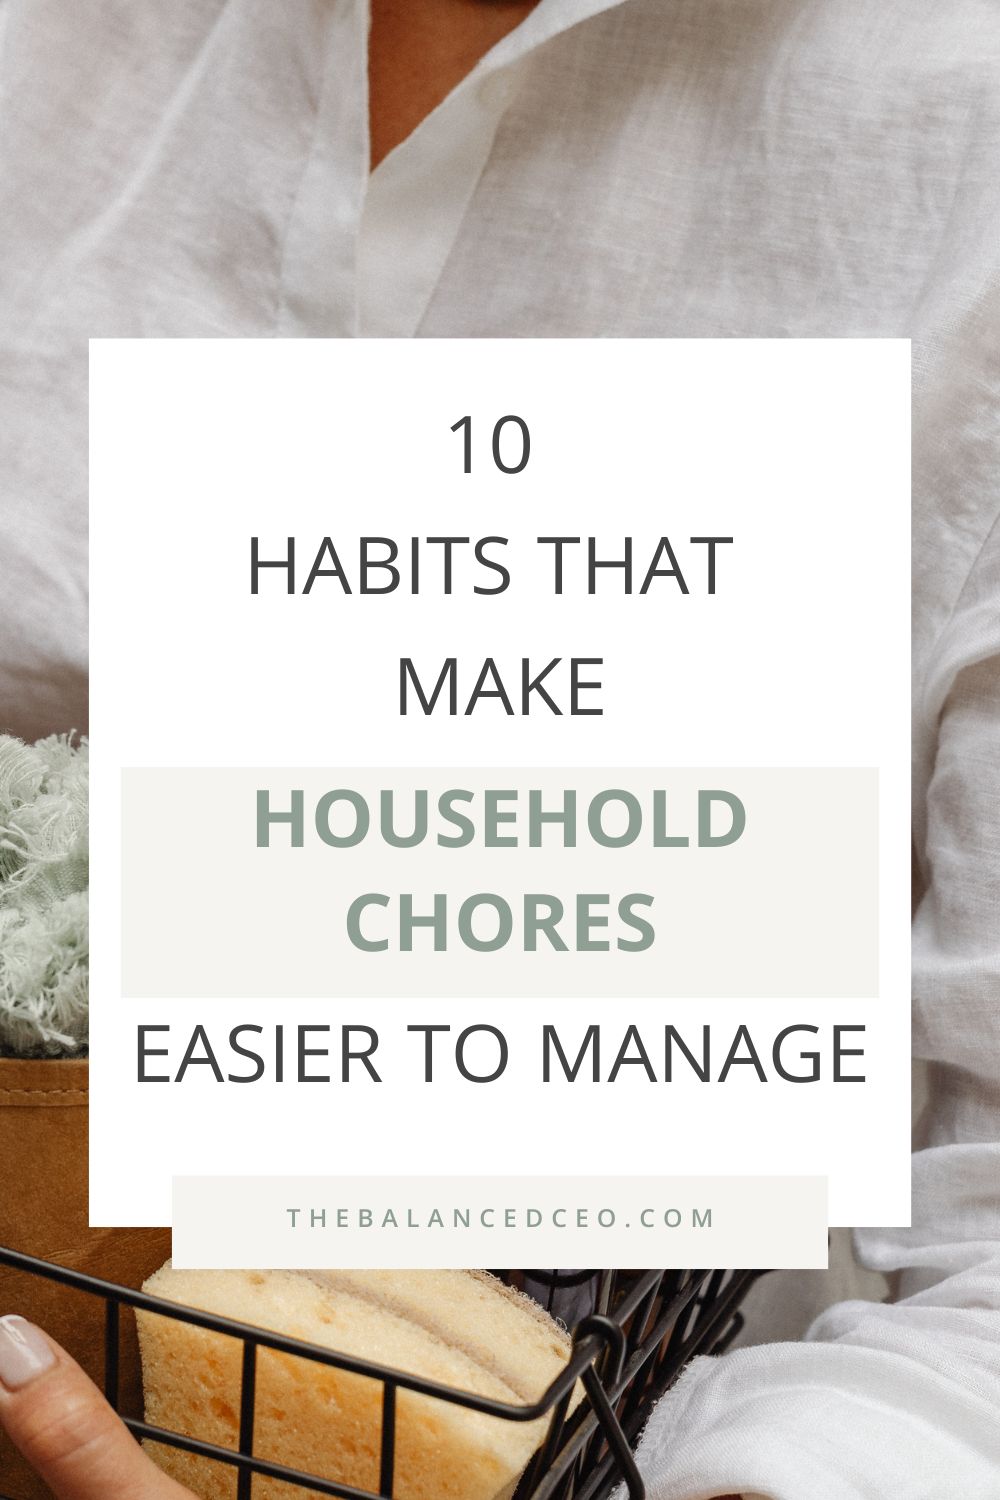 10 Habits That Make Household Chores Easier to Manage